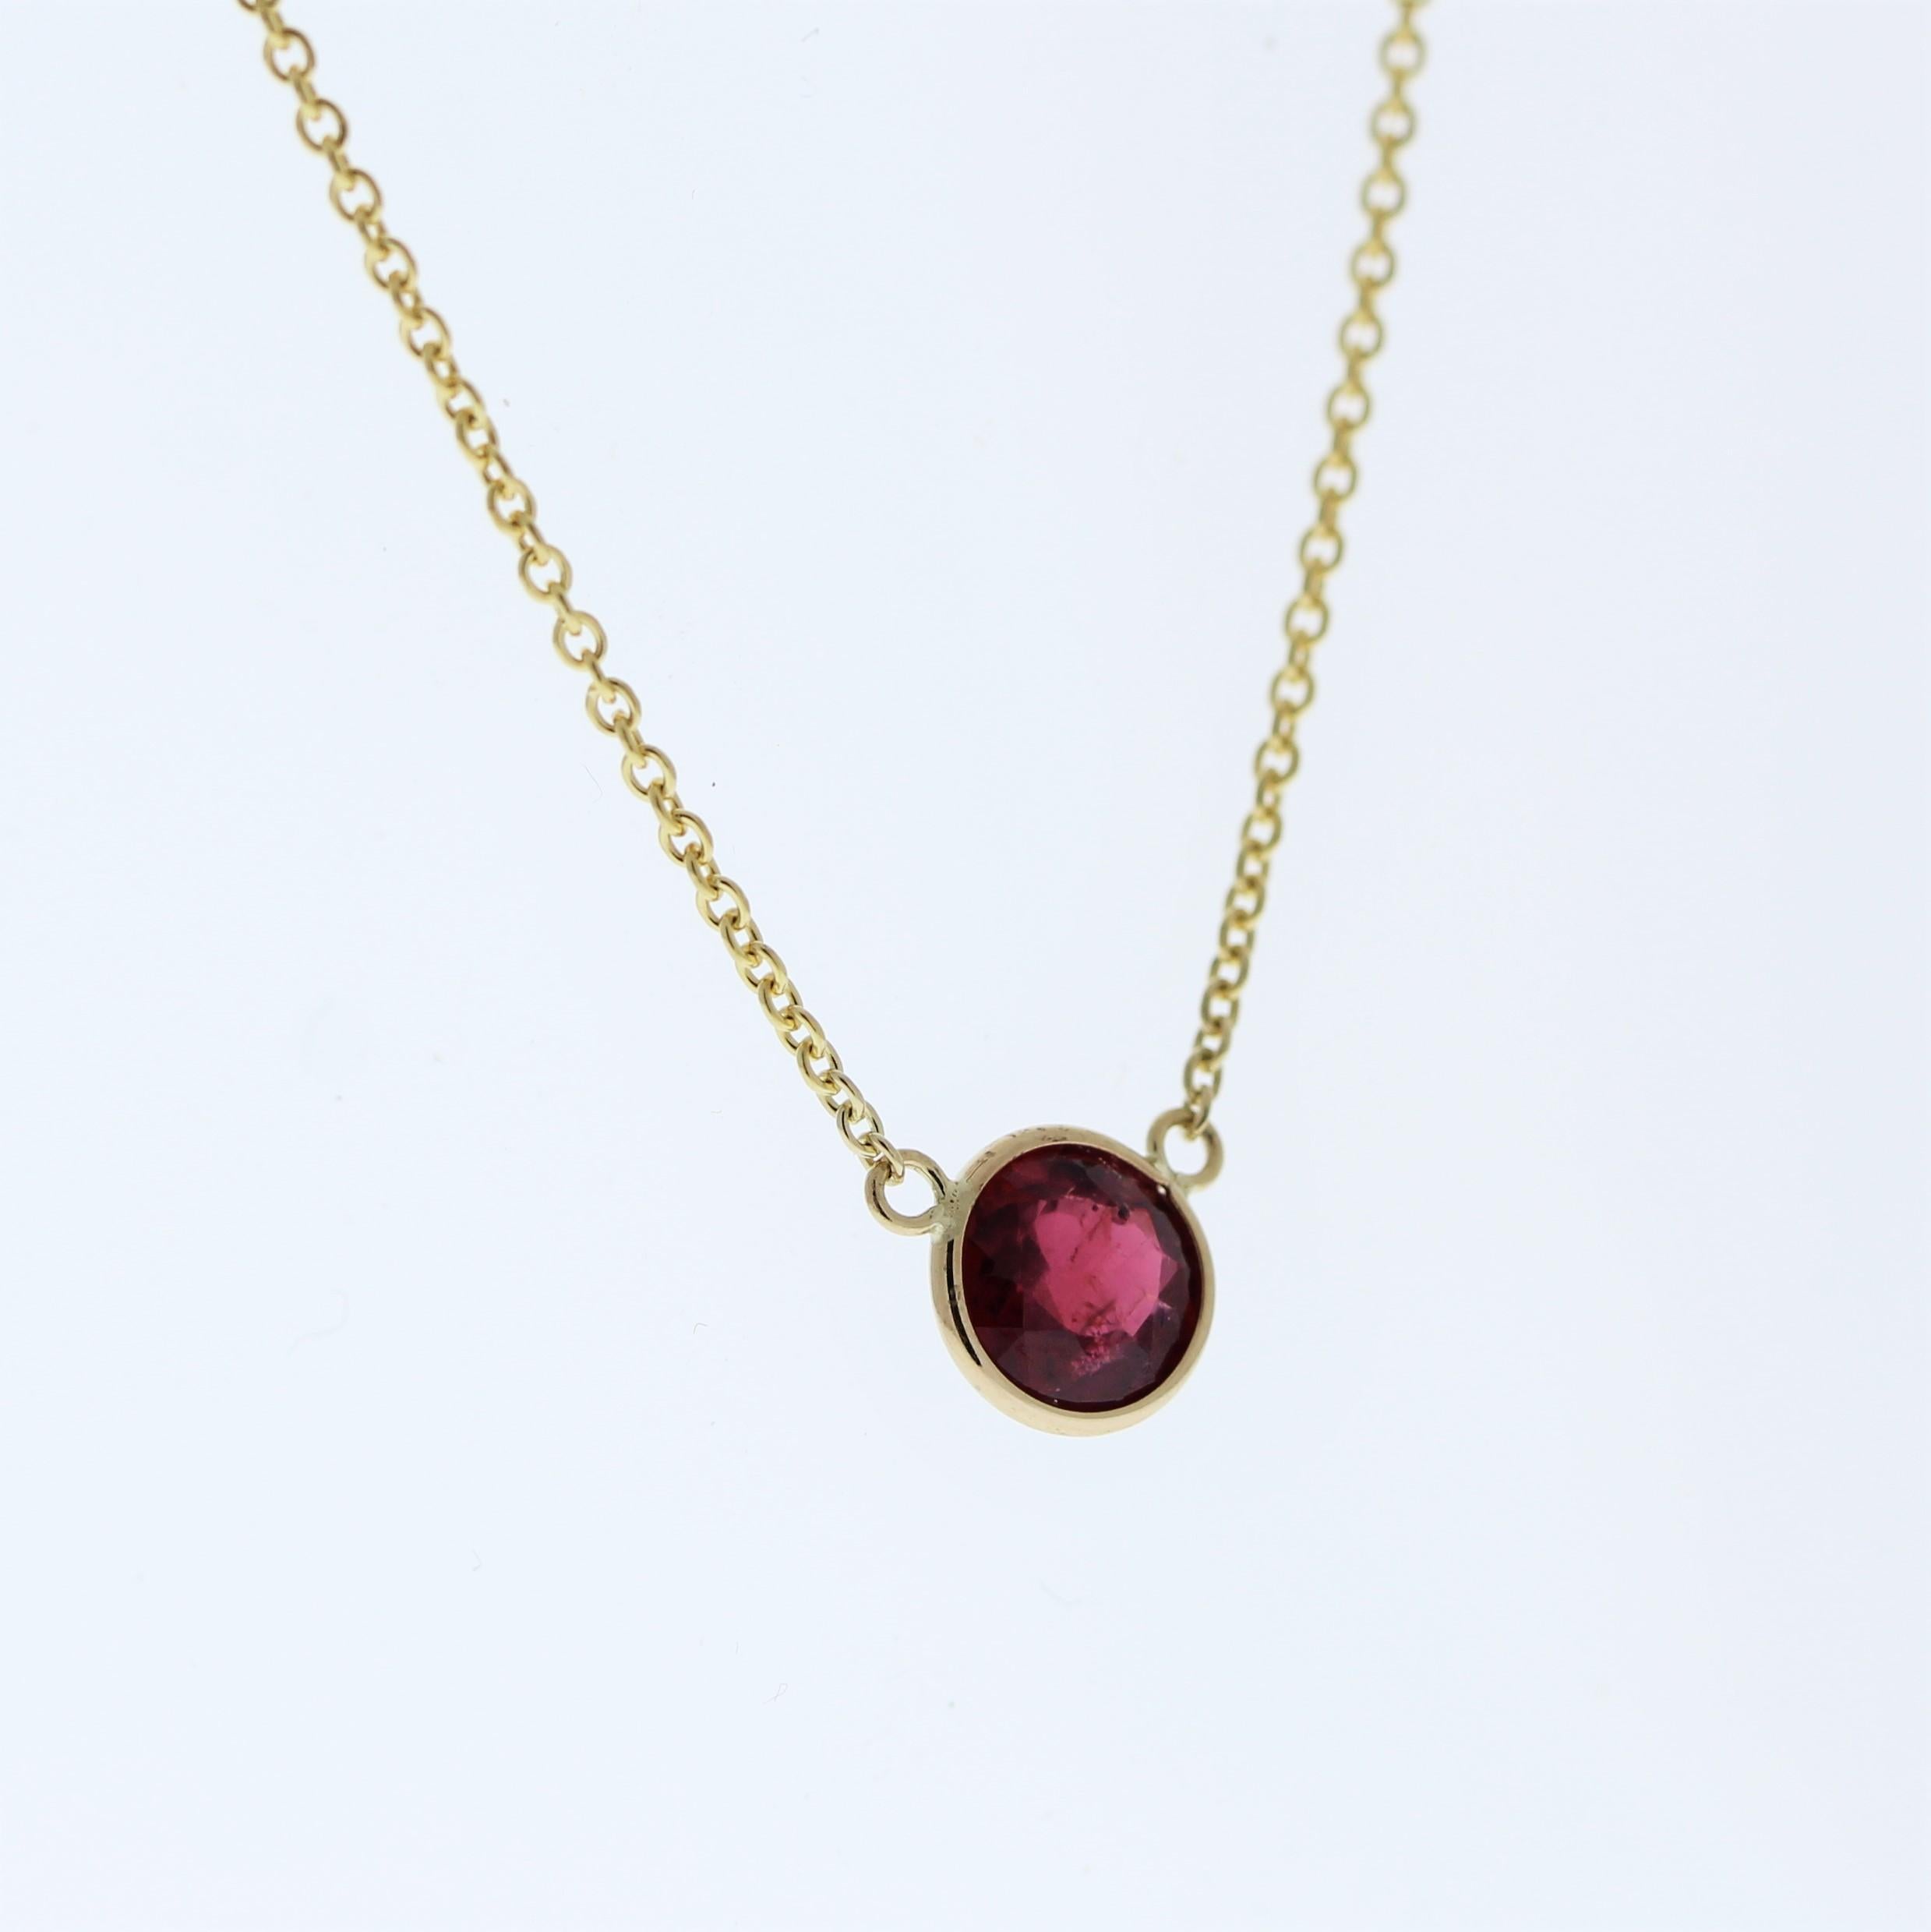 Contemporary 1.14 Carat Round Ruby Fashion Necklaces In 14k Yellow Gold For Sale